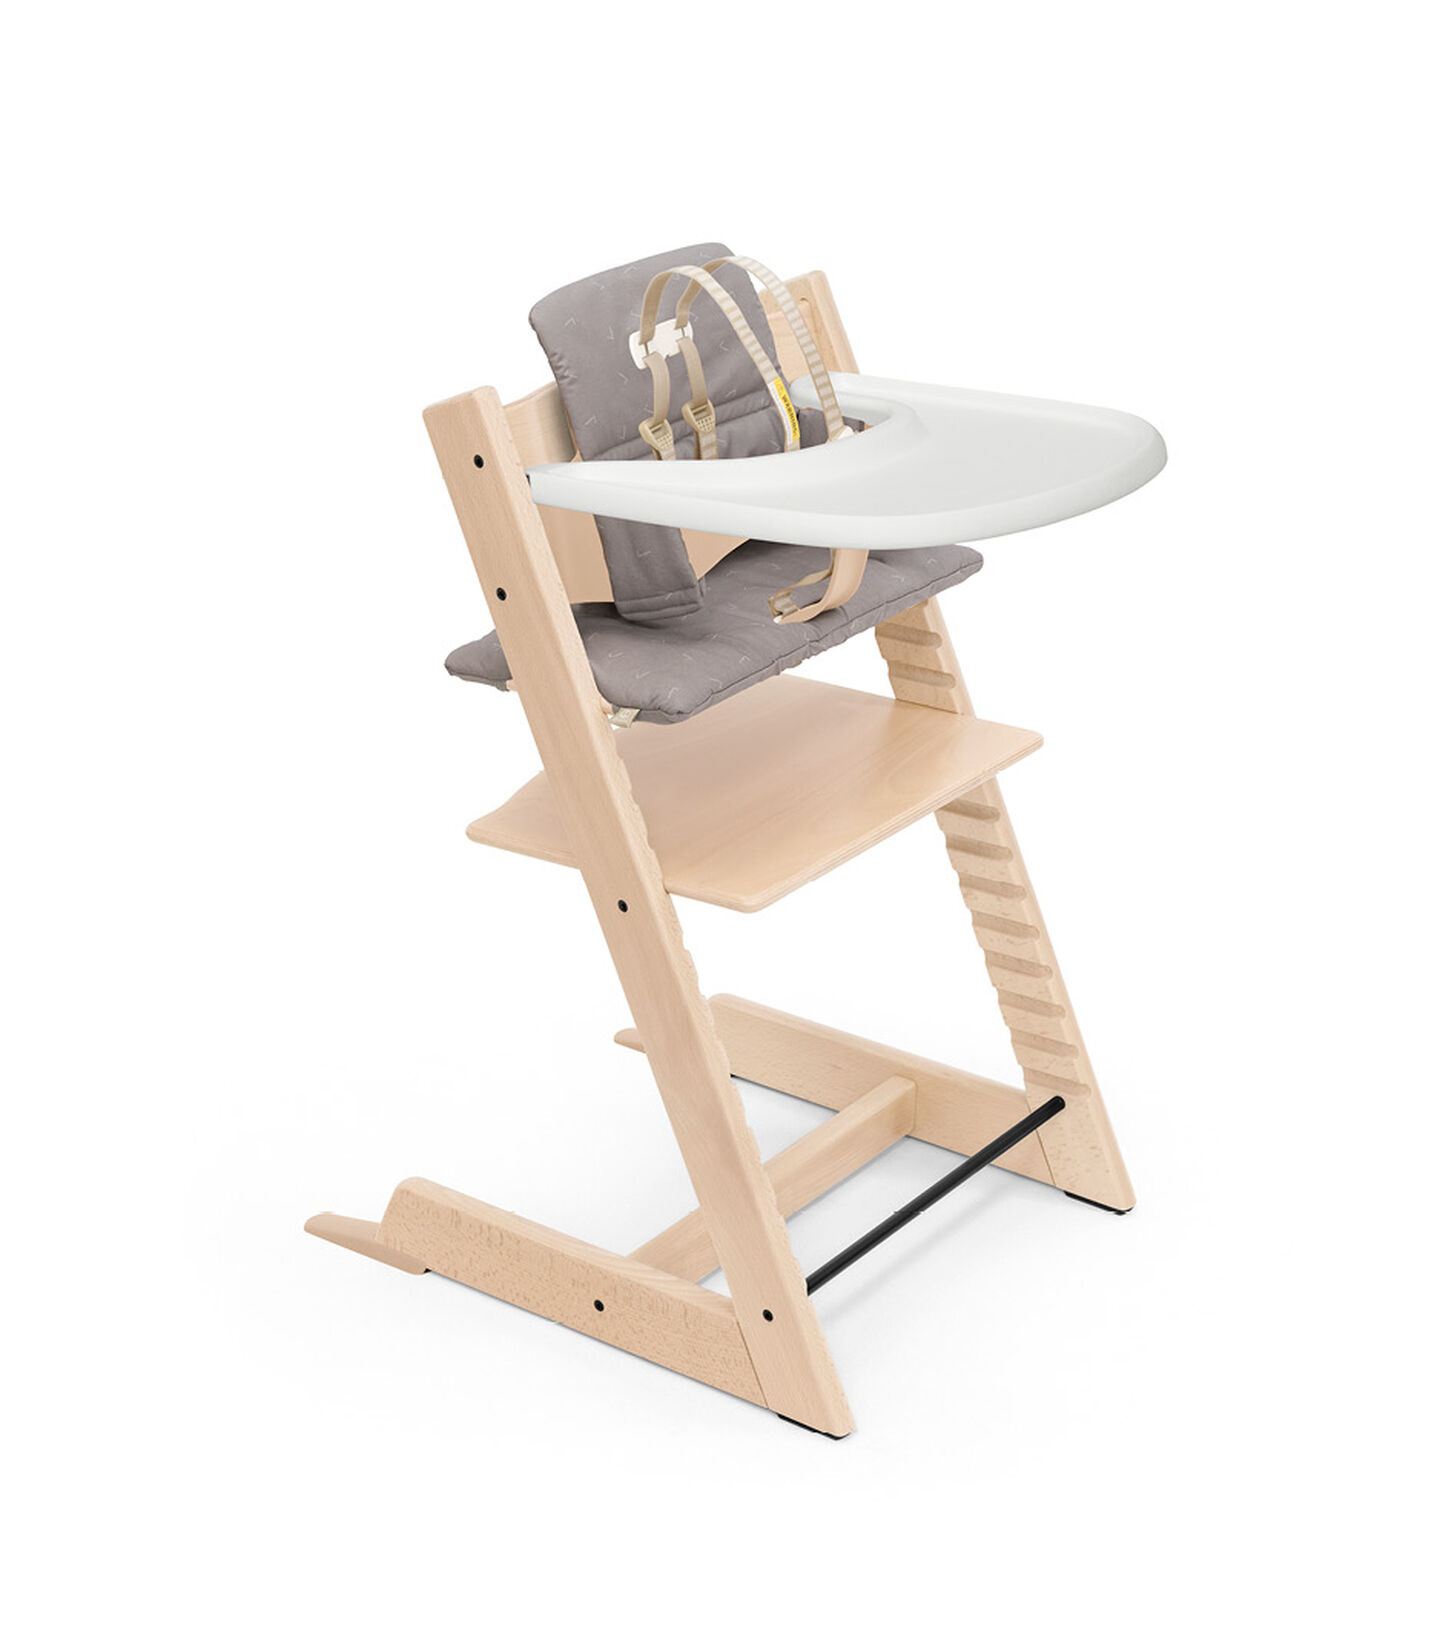 The Tripp Trapp is a convertible high chair that grows with the child.